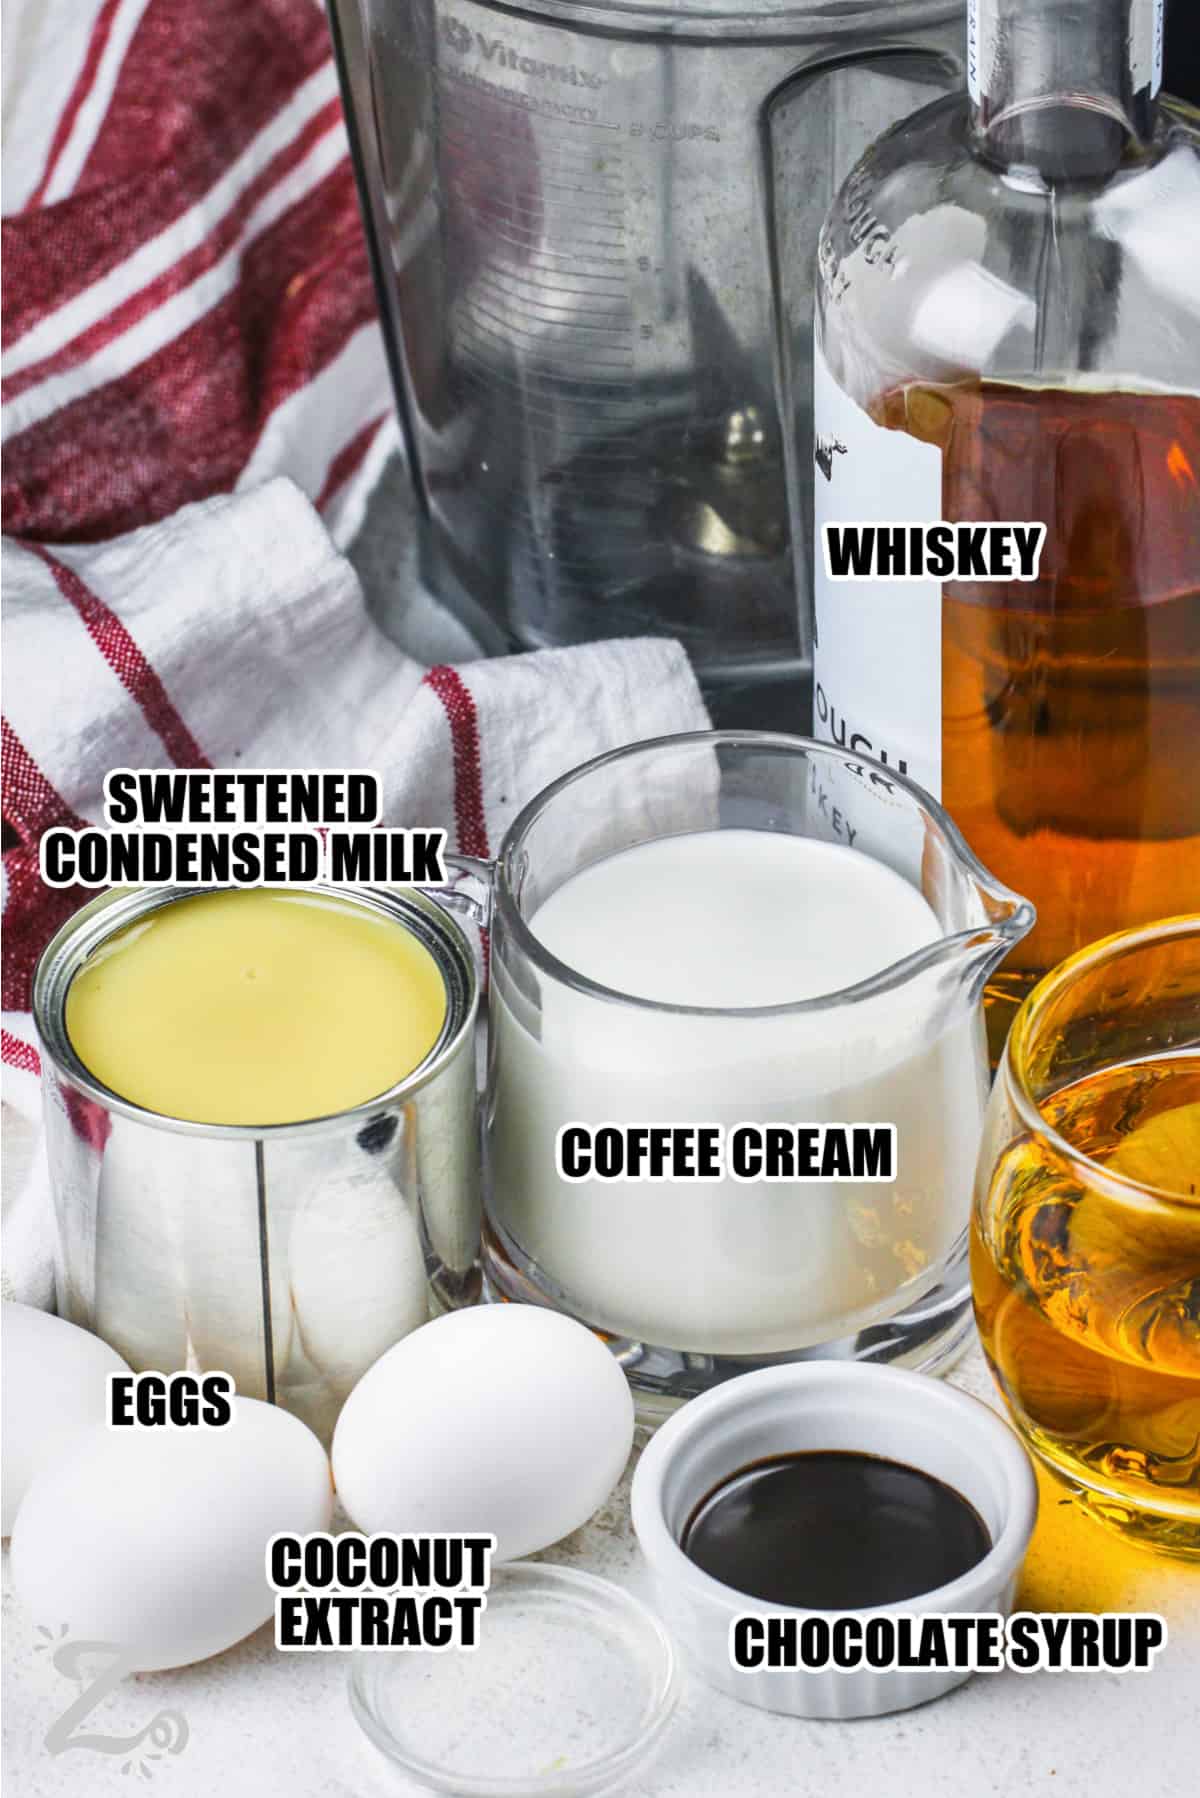 Ingredients to make Homemade Irish Cream labeled: whiskey, sweetened condensed milk, coffee cream, chocolate syrup, coconut extract, and eggs.